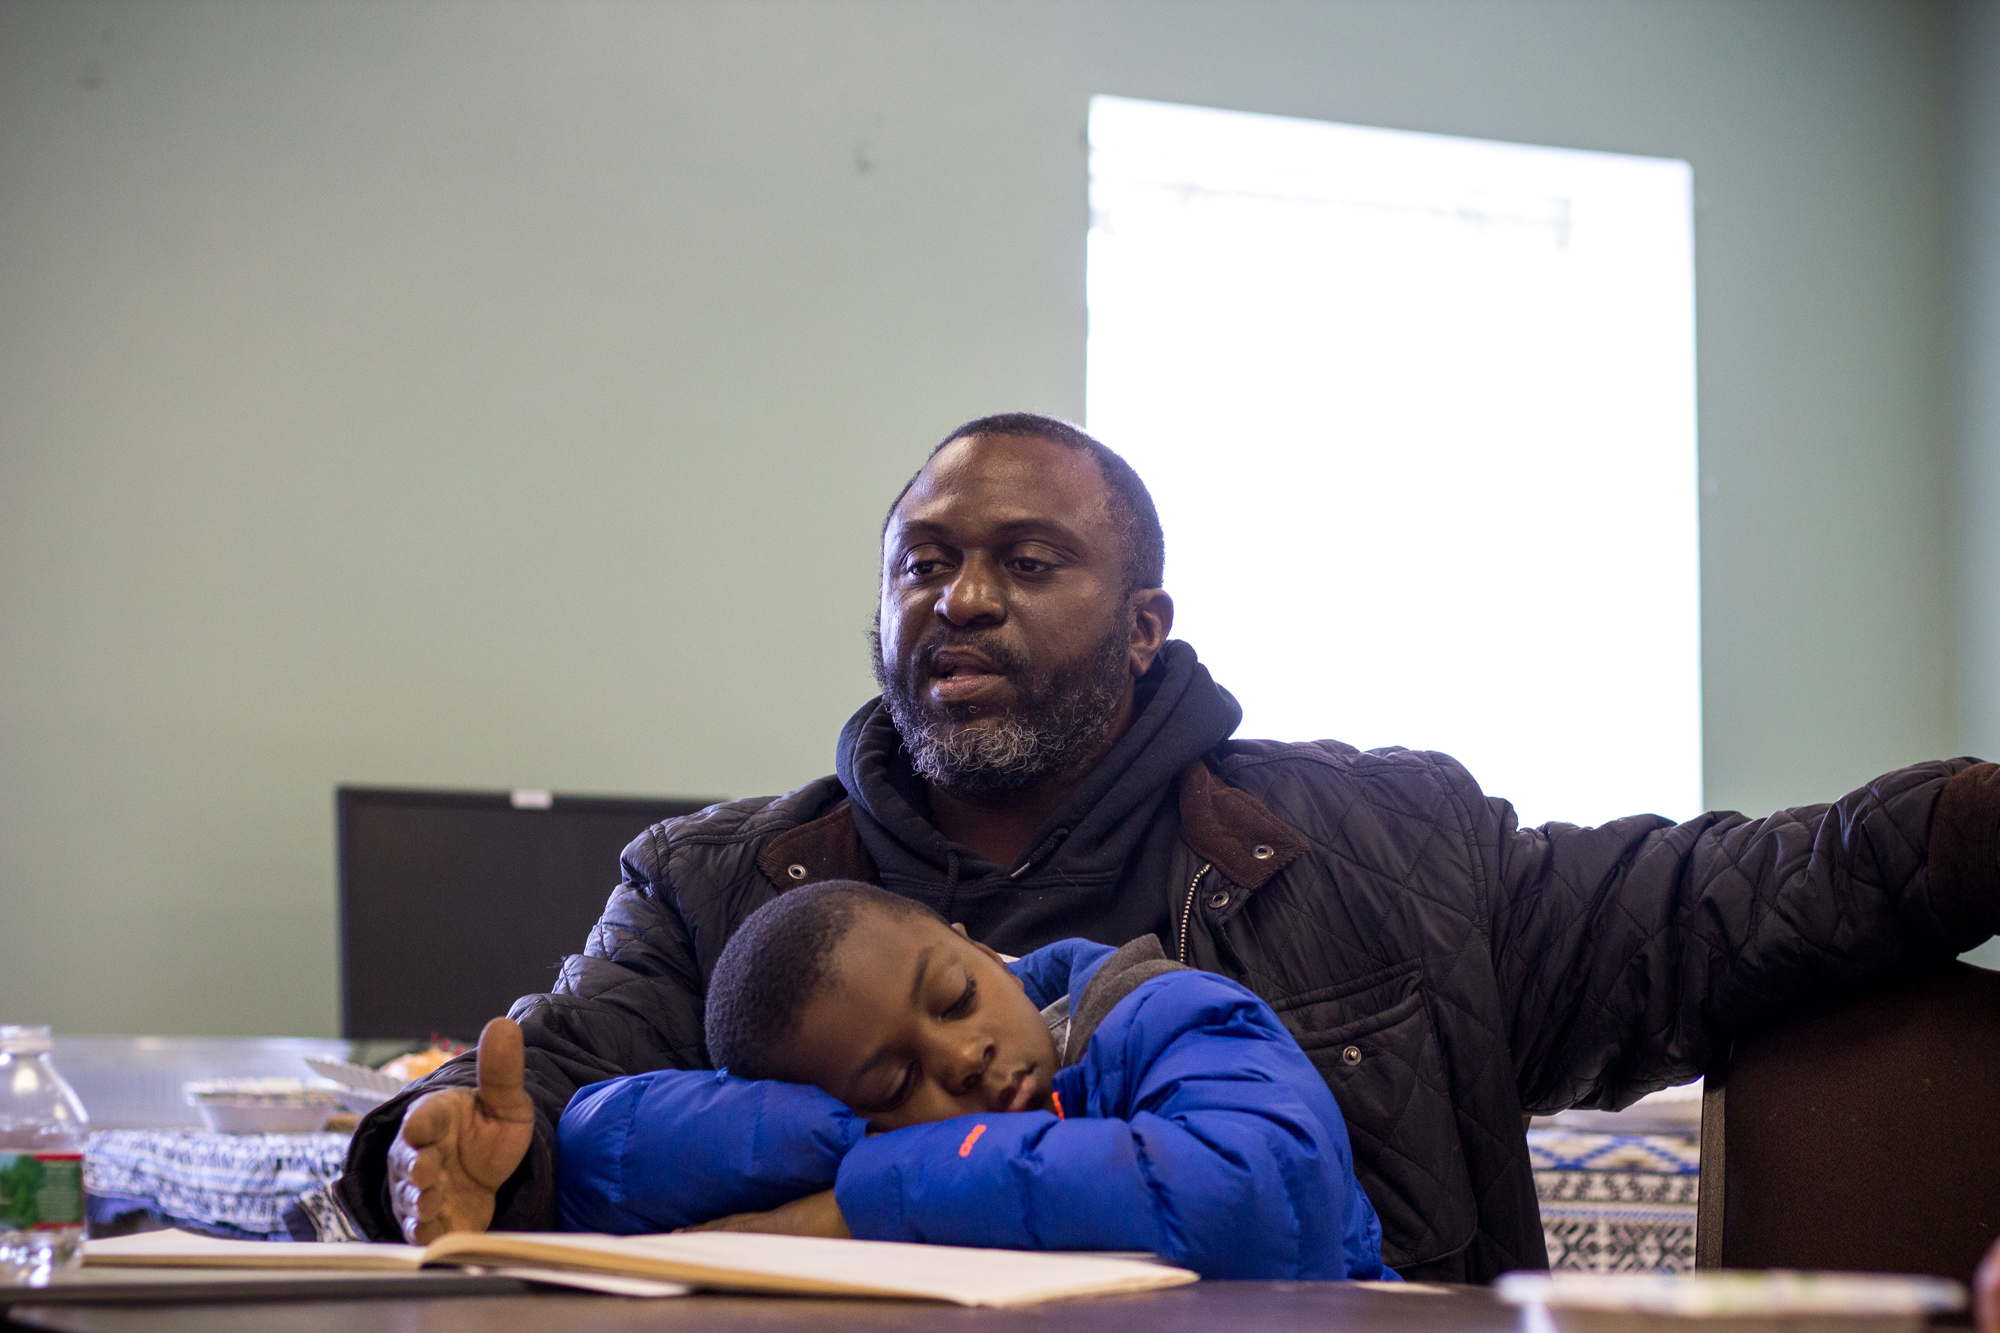  Al Custis, 42, speaks during The Redline Project workshop while his son,&nbsp;Kheli, 9, rests on his lap January 16, 2016.  "All I ever knew was 18th and Dickinson. It is somewhere, even now, I call a comfort zone for me. If I’m going through a situ